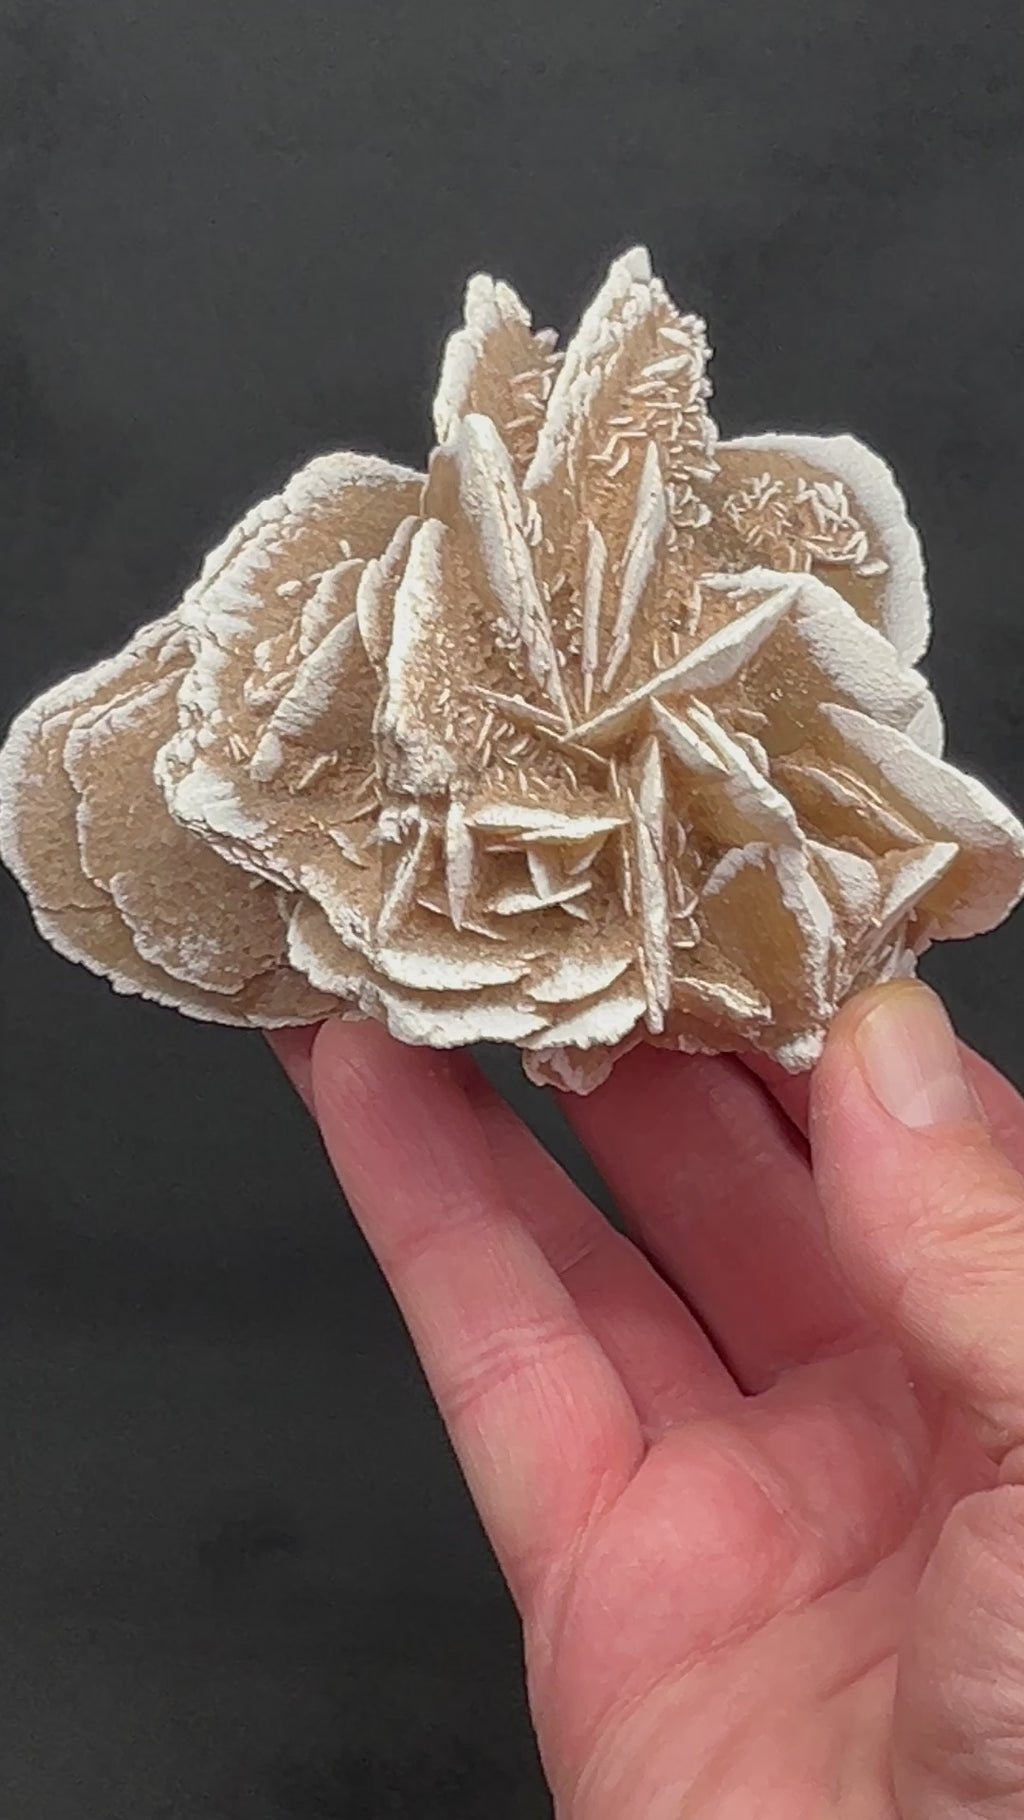 This large, exceptional Gypsum - Selenite Rose is from Samalayuca, Chihuahua, Mexico.